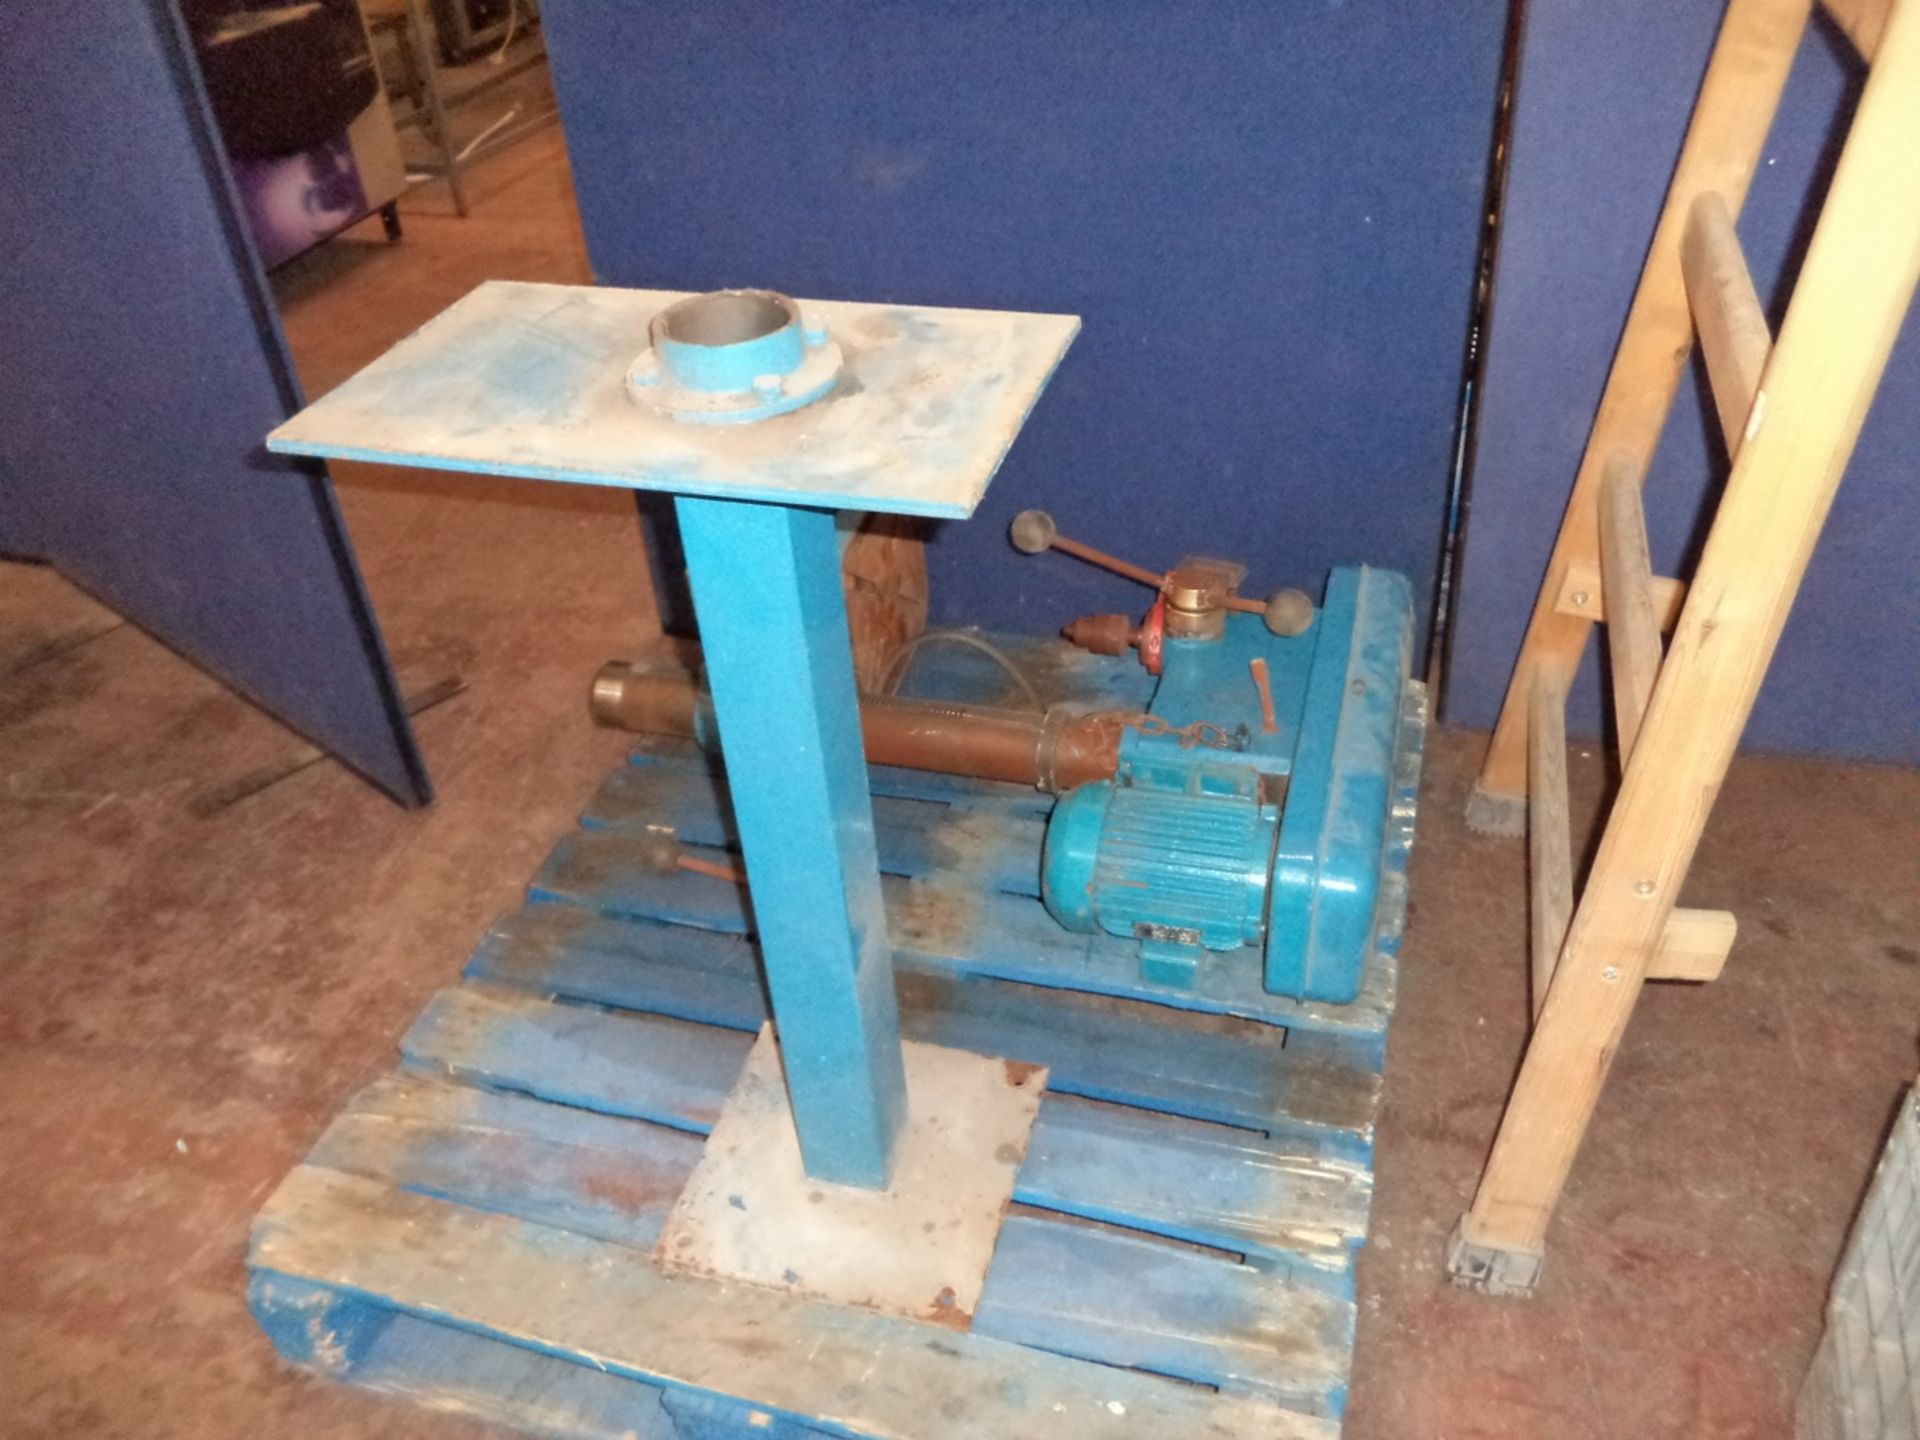 Pillar drill and base for mounting same - Image 4 of 4